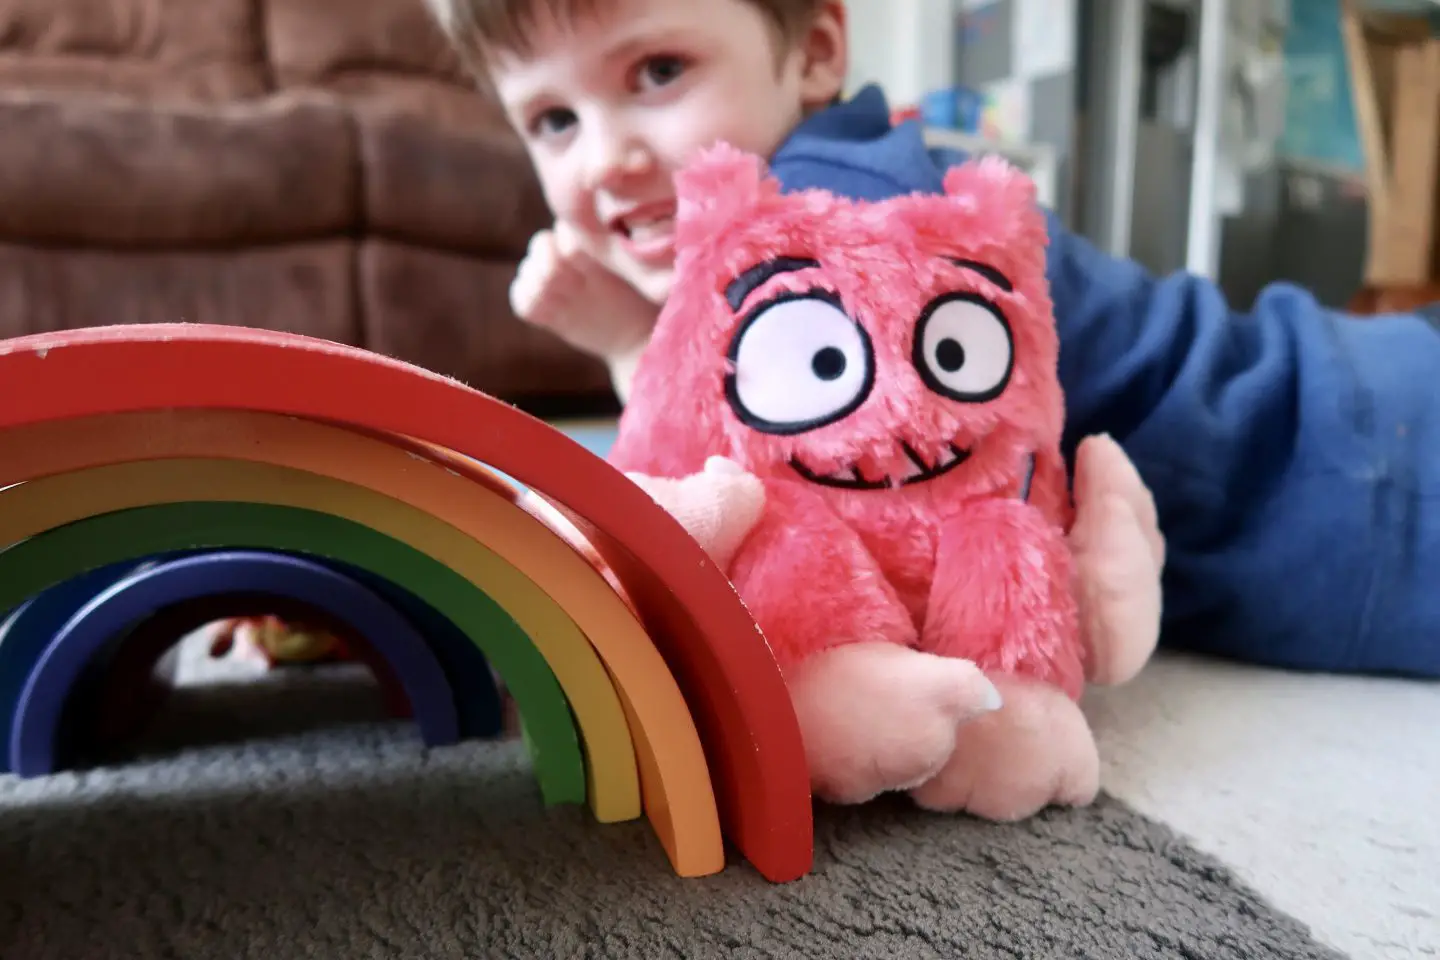 A wooden rainbow next to a fluffy monster toy. There is a boy smiling in the background slightly out of focus